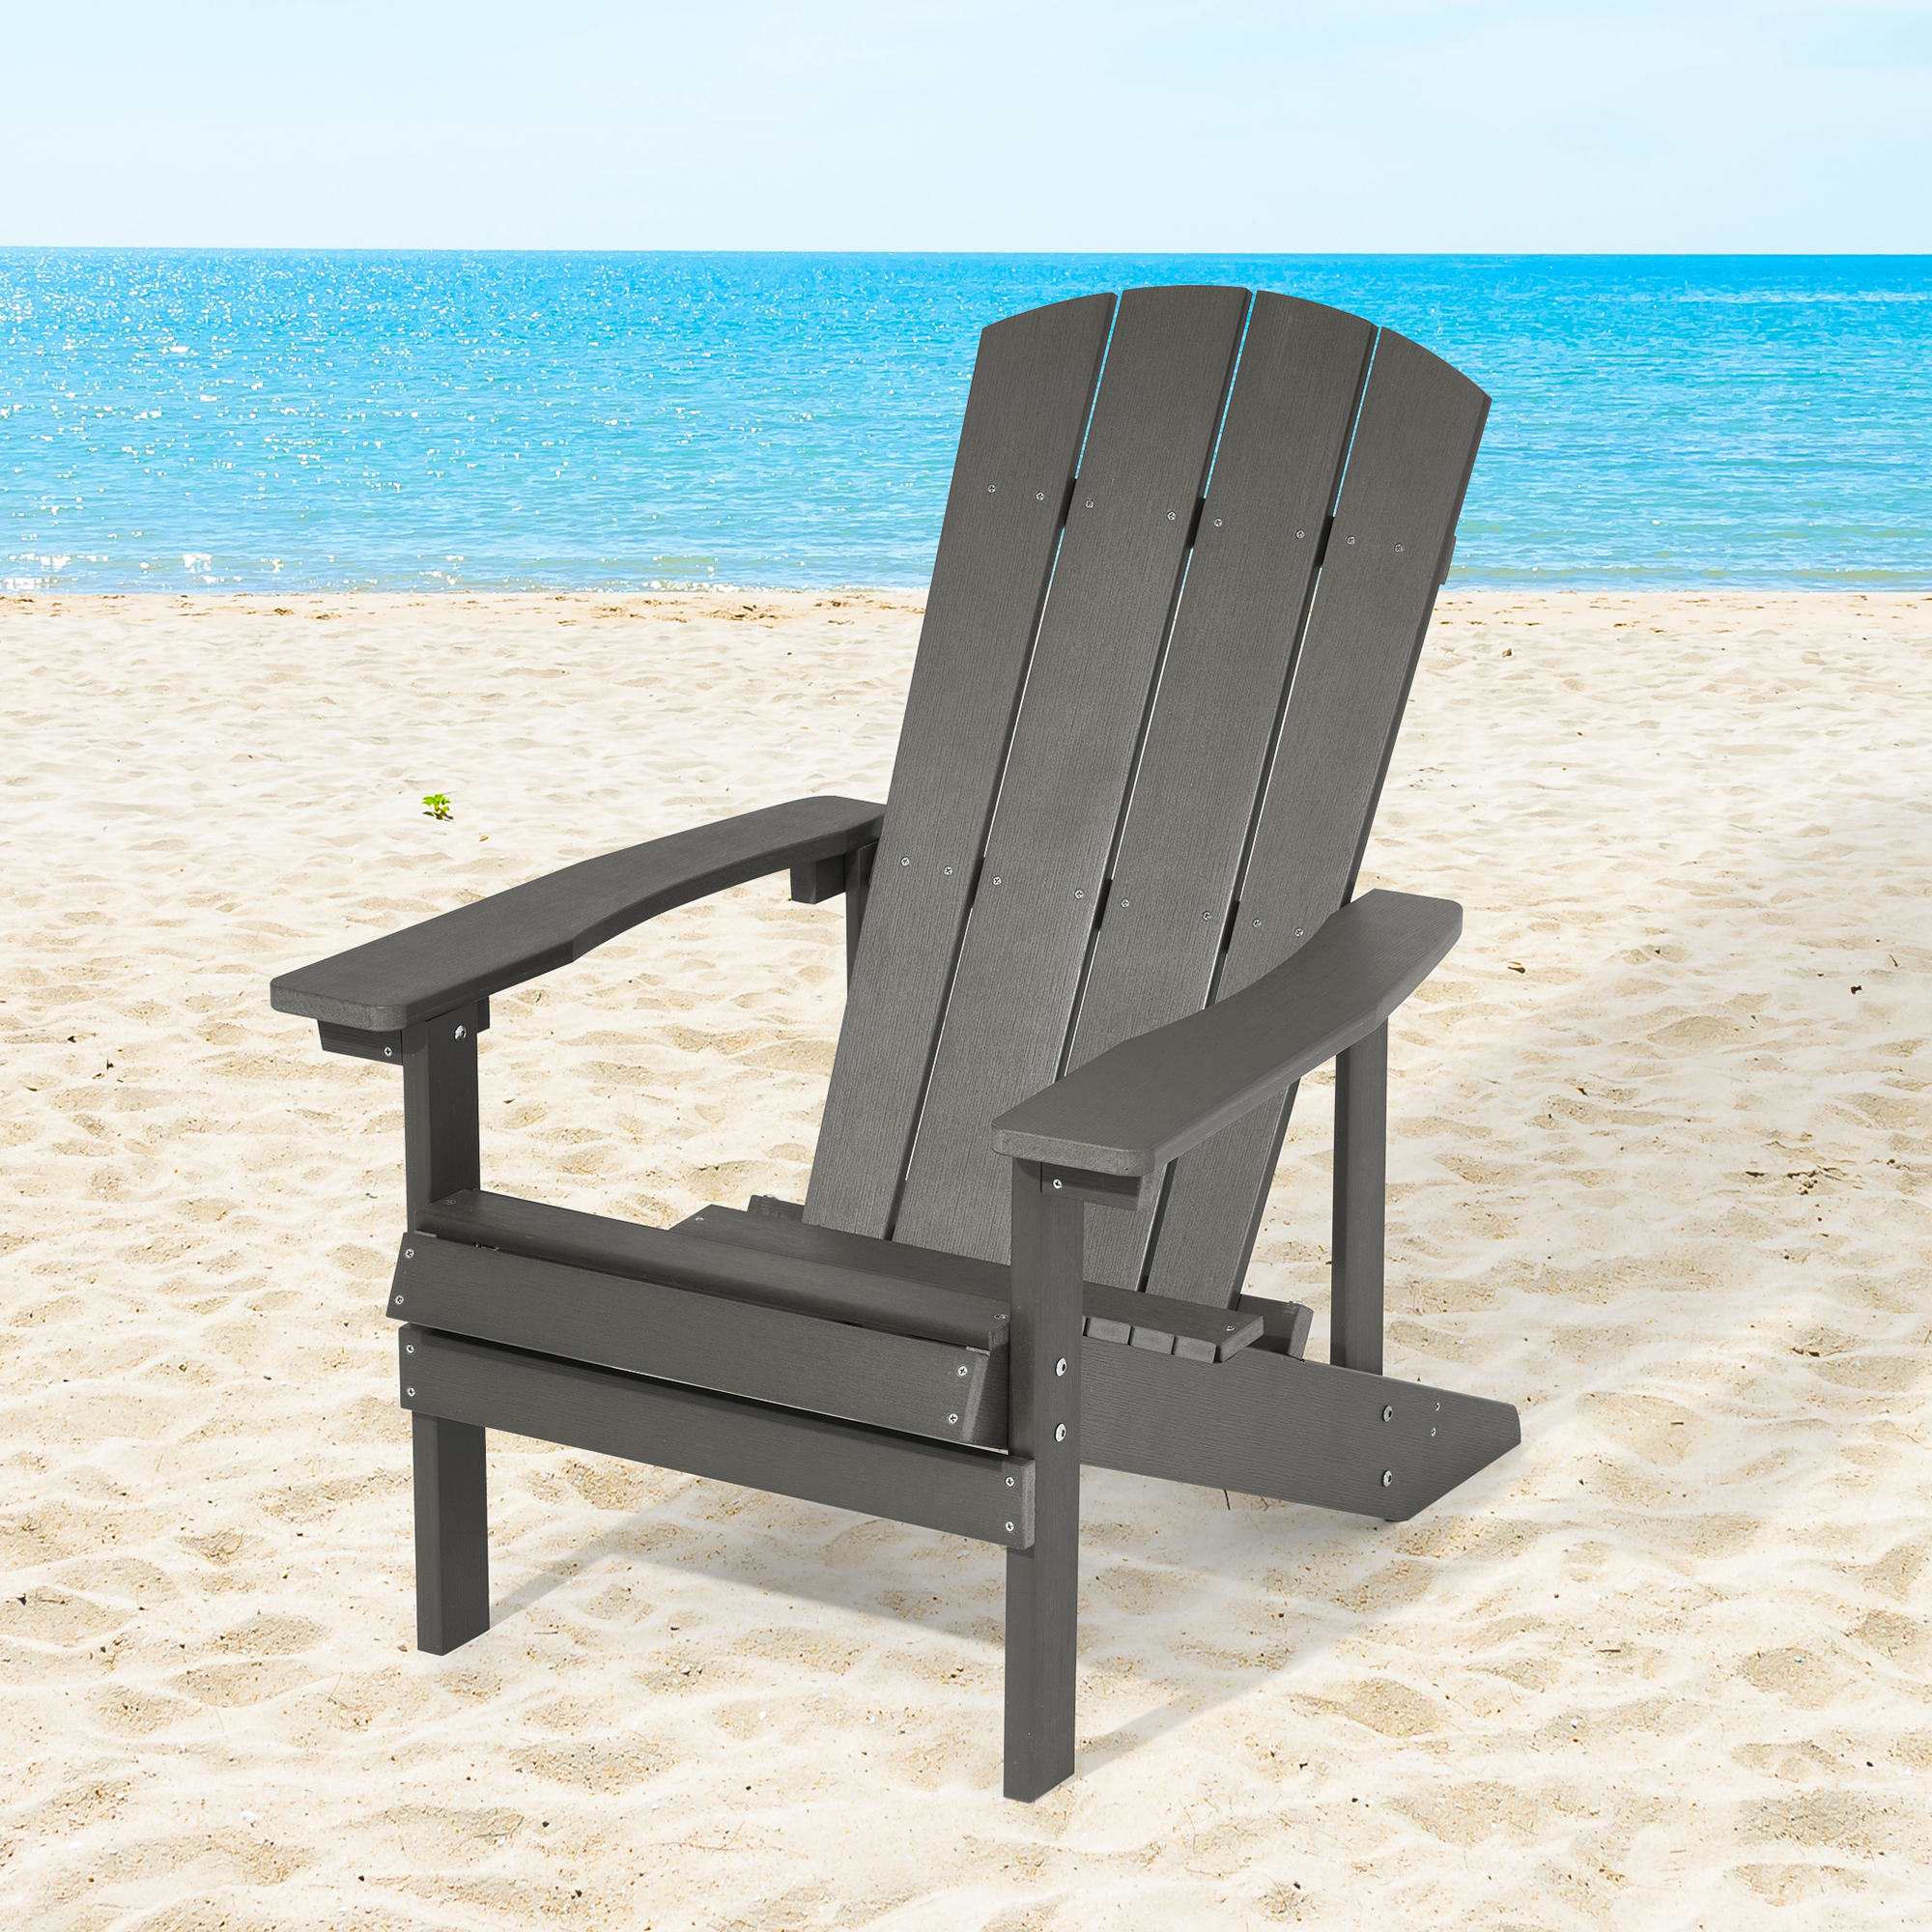 CHYVARY 1 Peak Adirondack Chair, Fire Pit Outdoor Patio Furniture,Gray - image 1 of 7